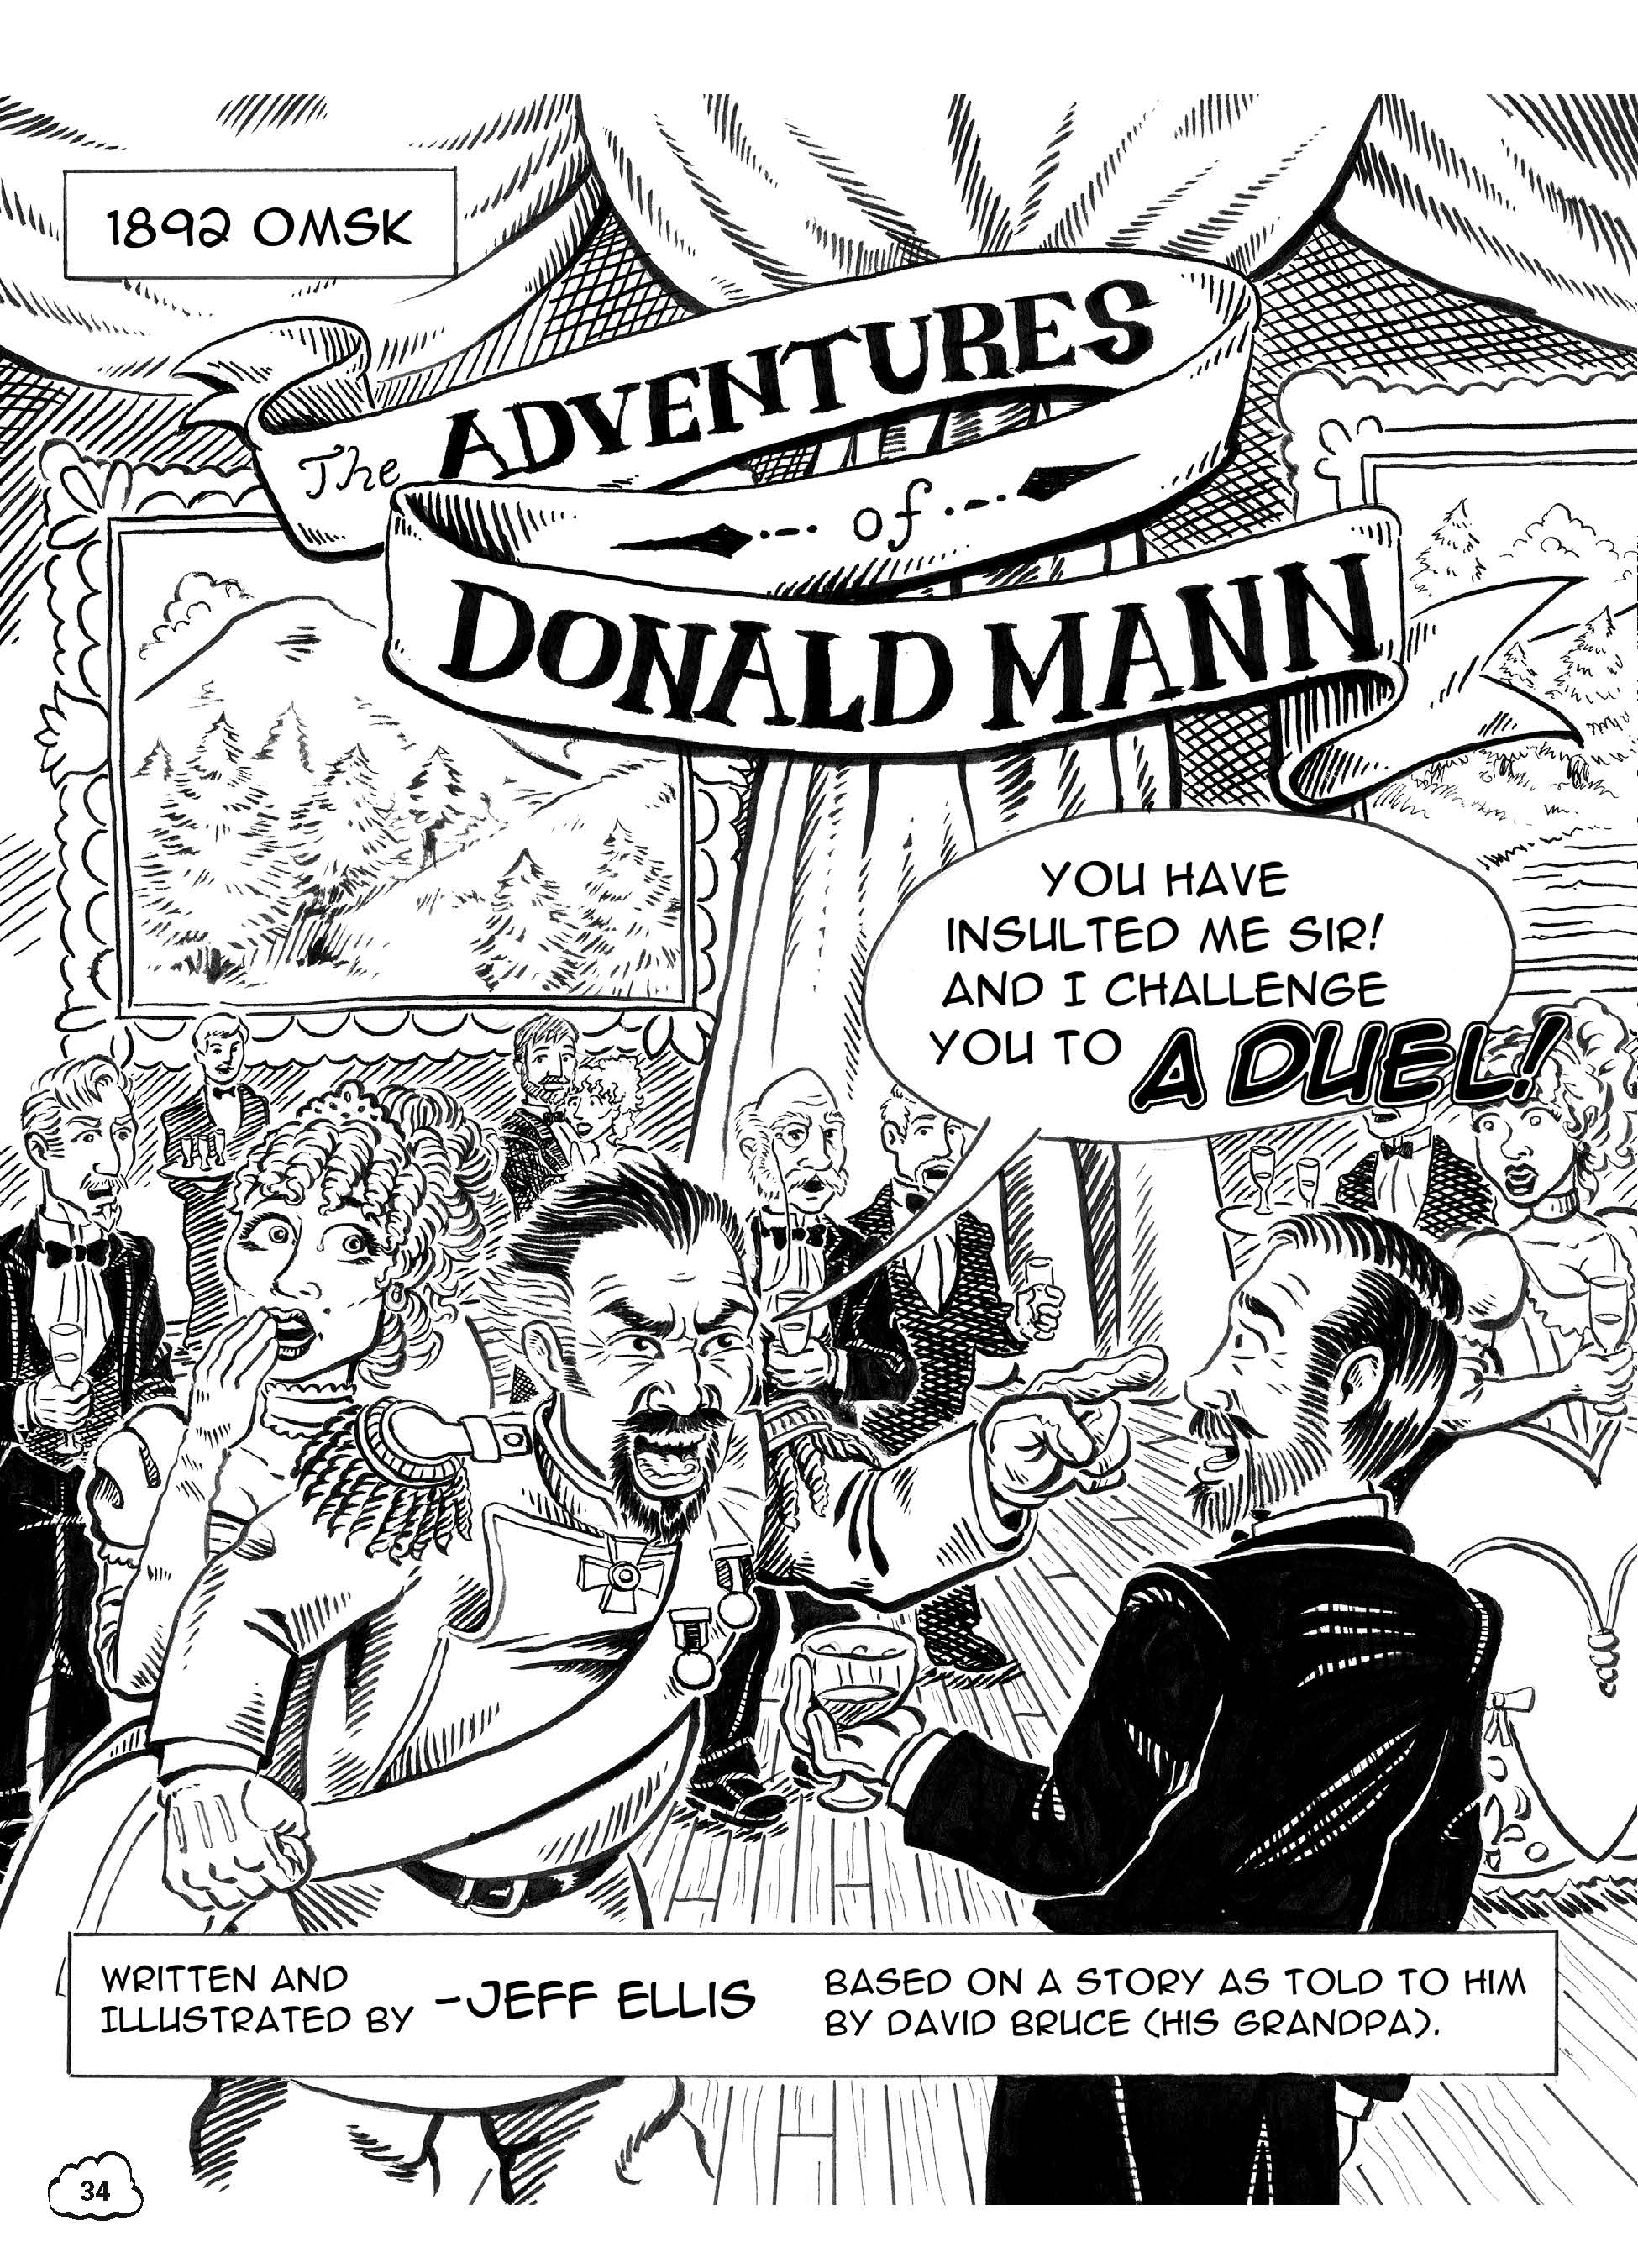 The Adventures of Donald Mann page 01